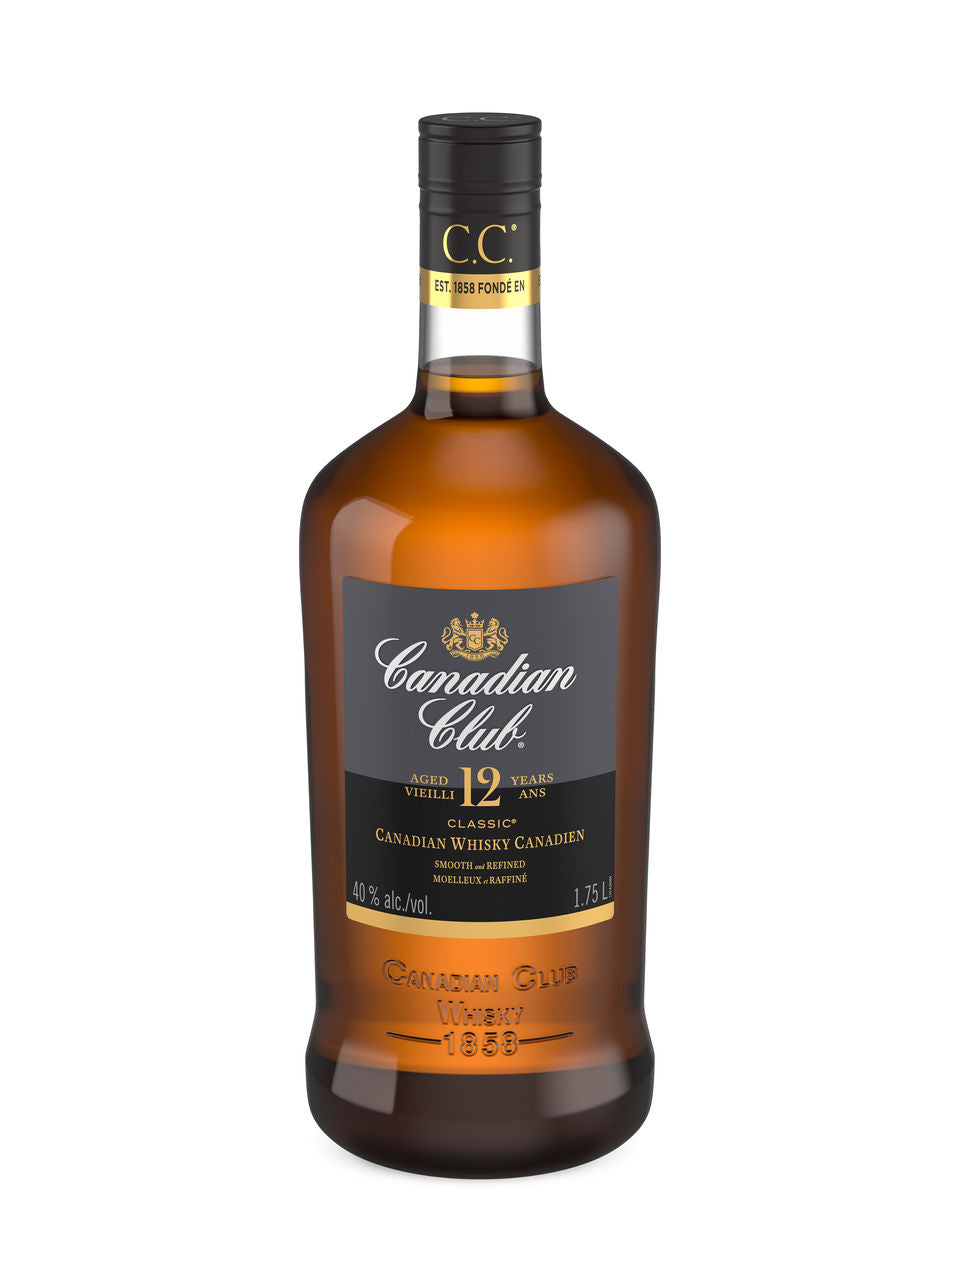 Canadian Club Classic 12 Year Old 1750 mL bottle